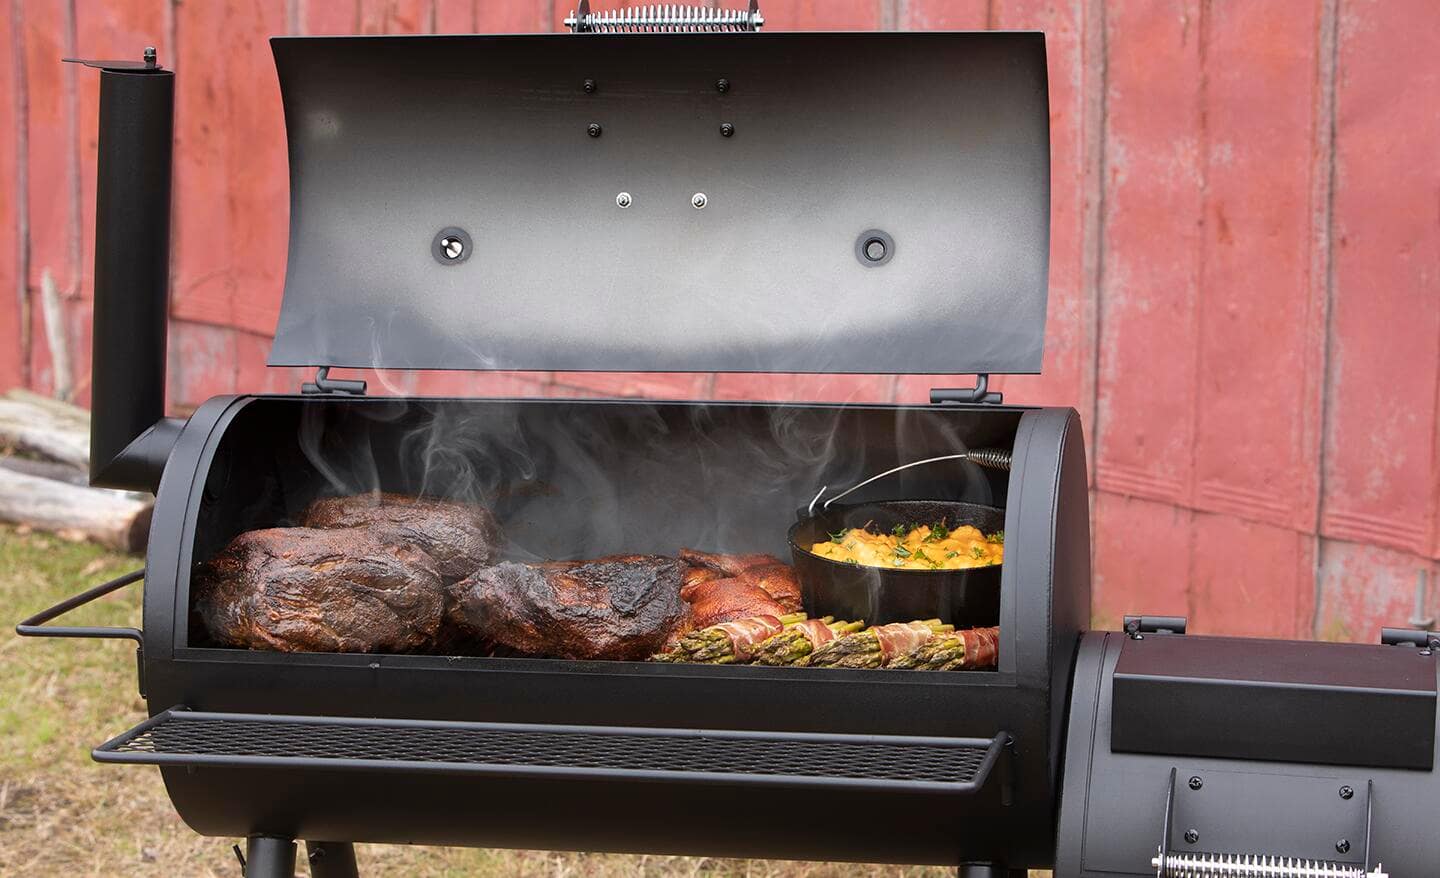 Meat and vegetables are cooked on a smoker grill.